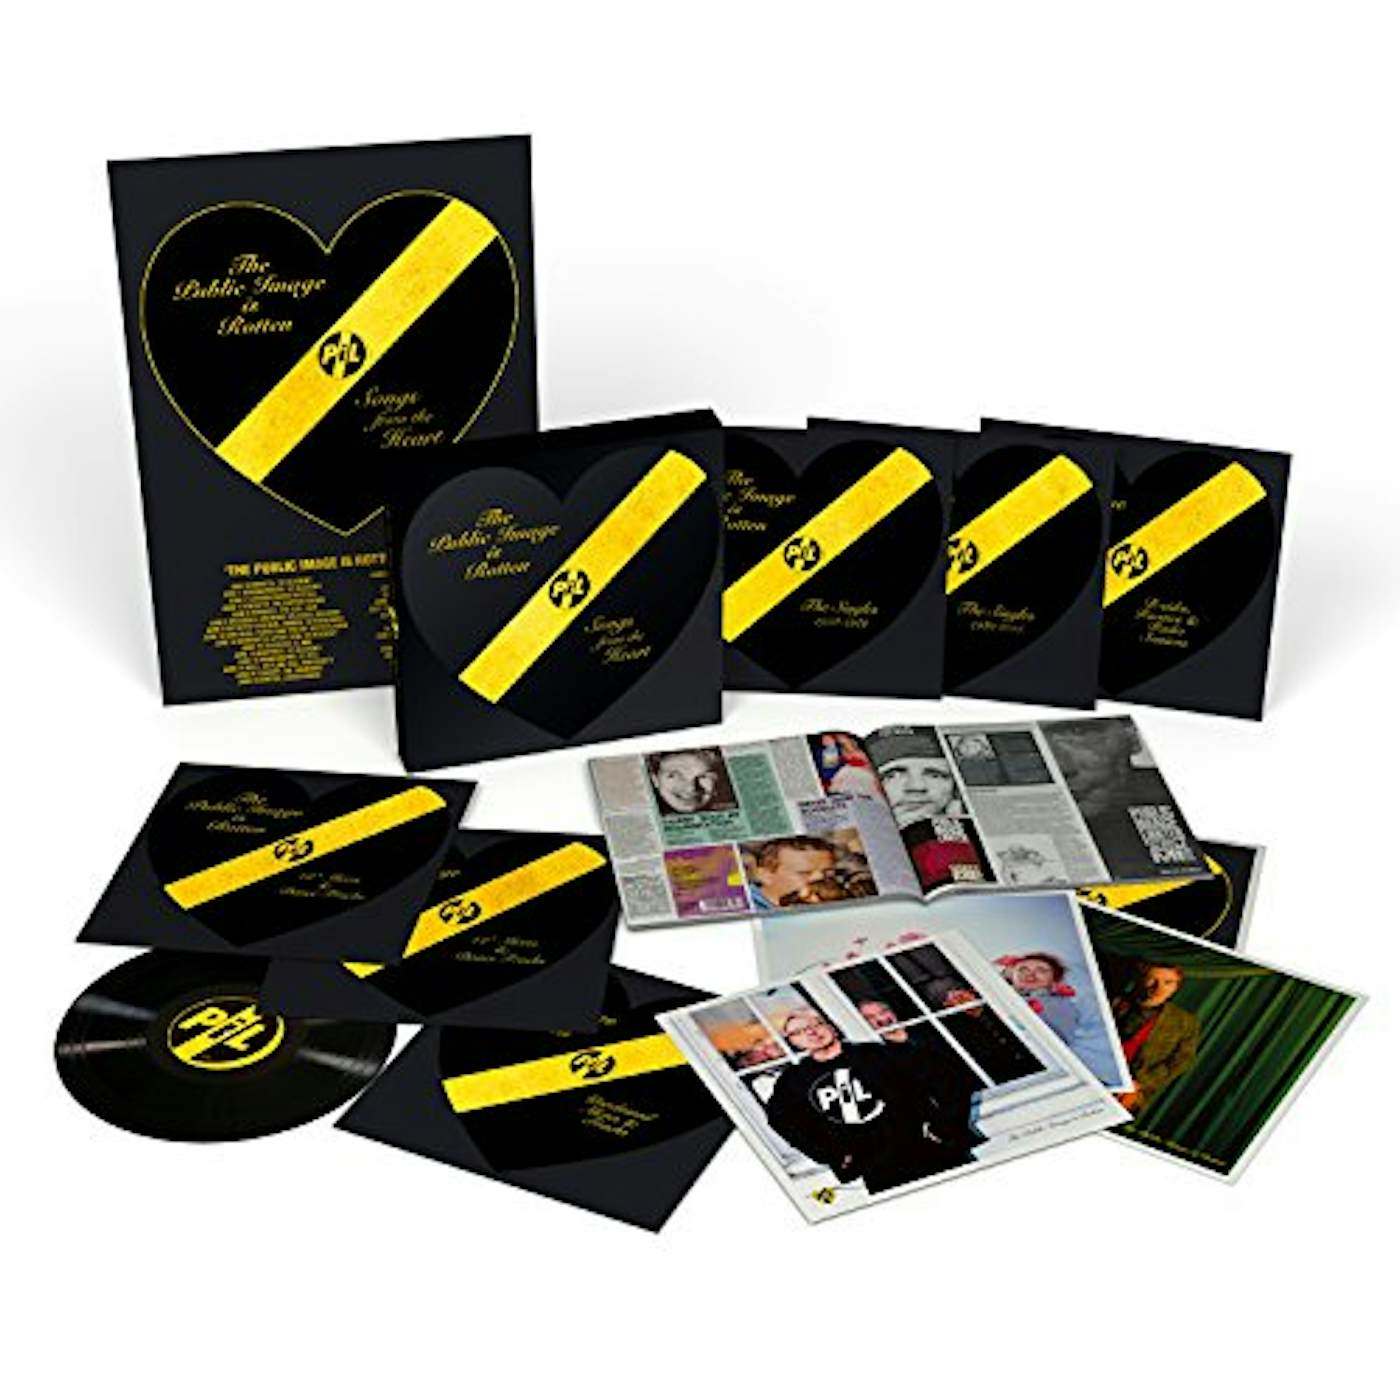 Public Image Ltd. IS ROTTEN (SONGS FROM THE HEART) Vinyl Record Box Set